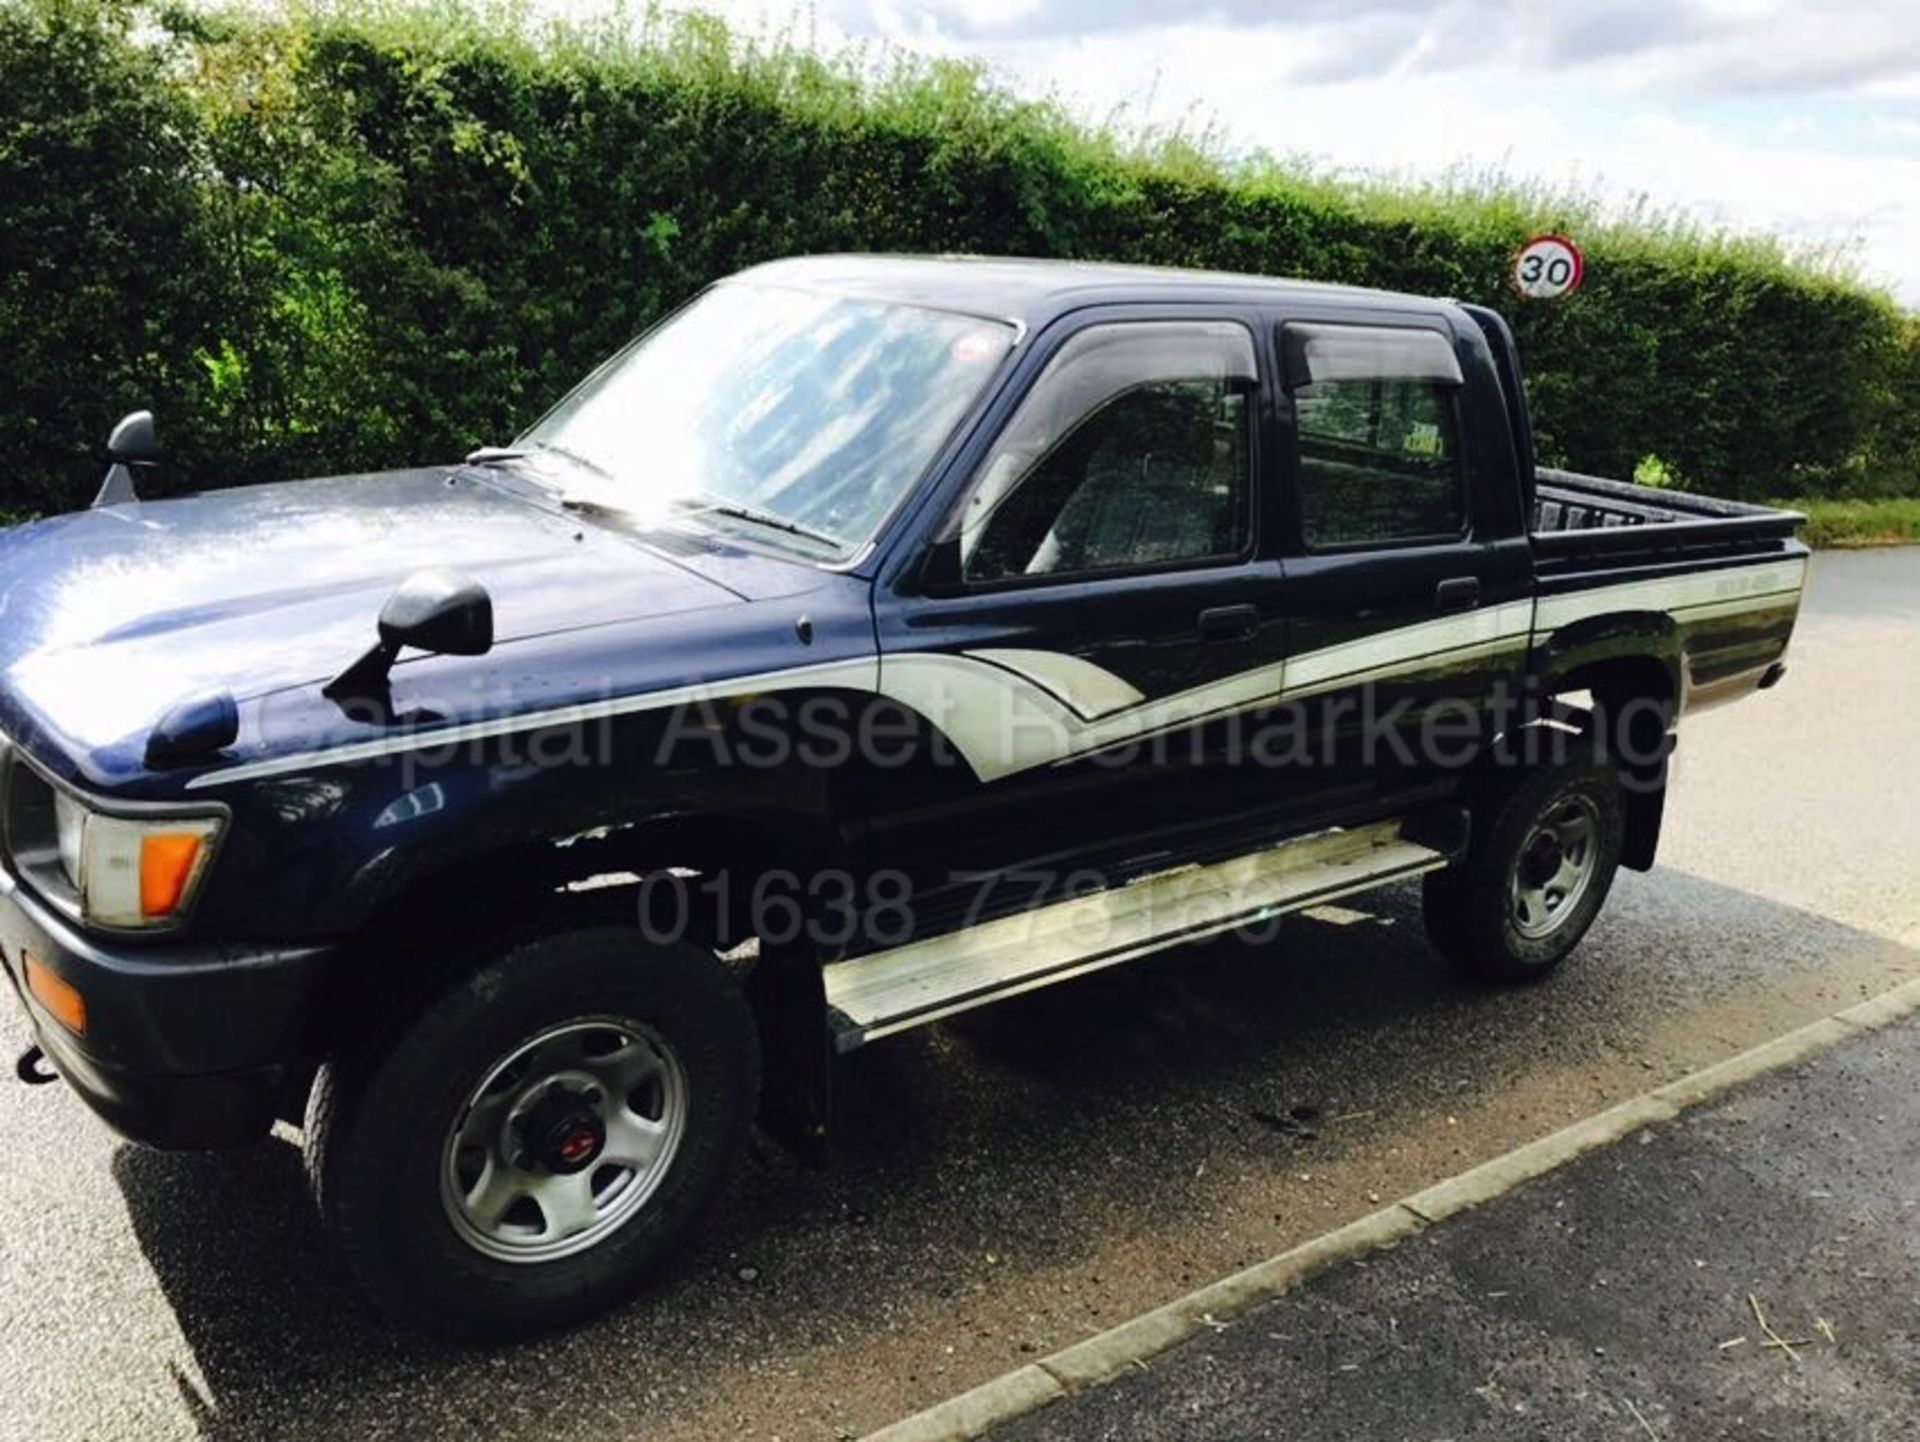 (On Sale) TOYOTA HILUX 'DOUBLE CAB' PICK-UP (1996 - N REG) 'DIESEL - 5 SPEED' **AIR CON** (NO VAT) - Image 4 of 15